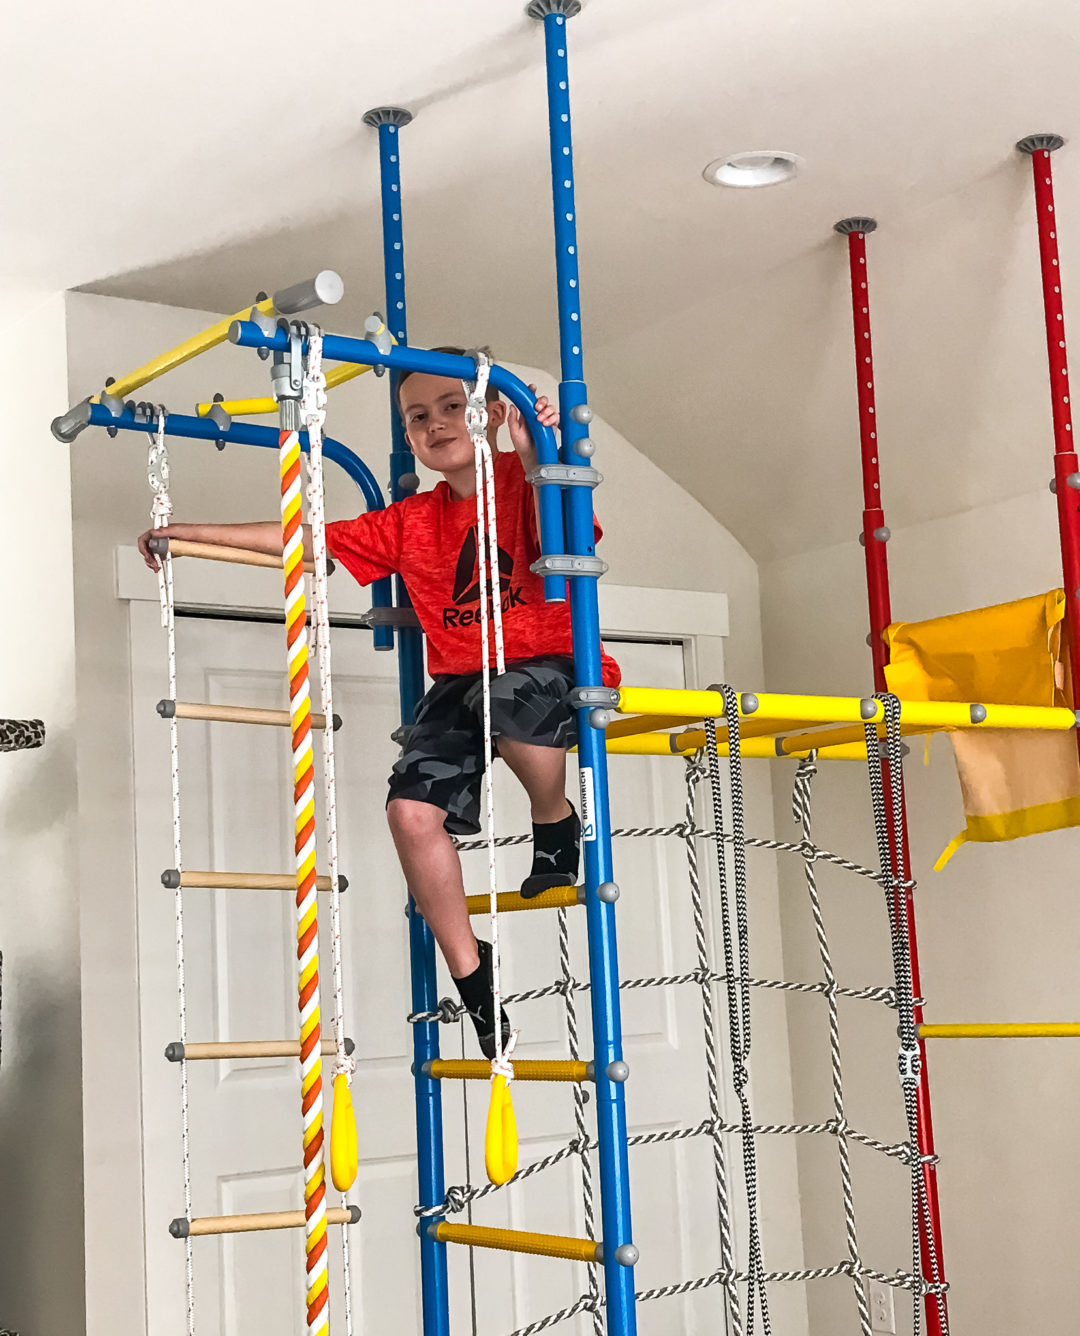 inside jungle gym for toddlers